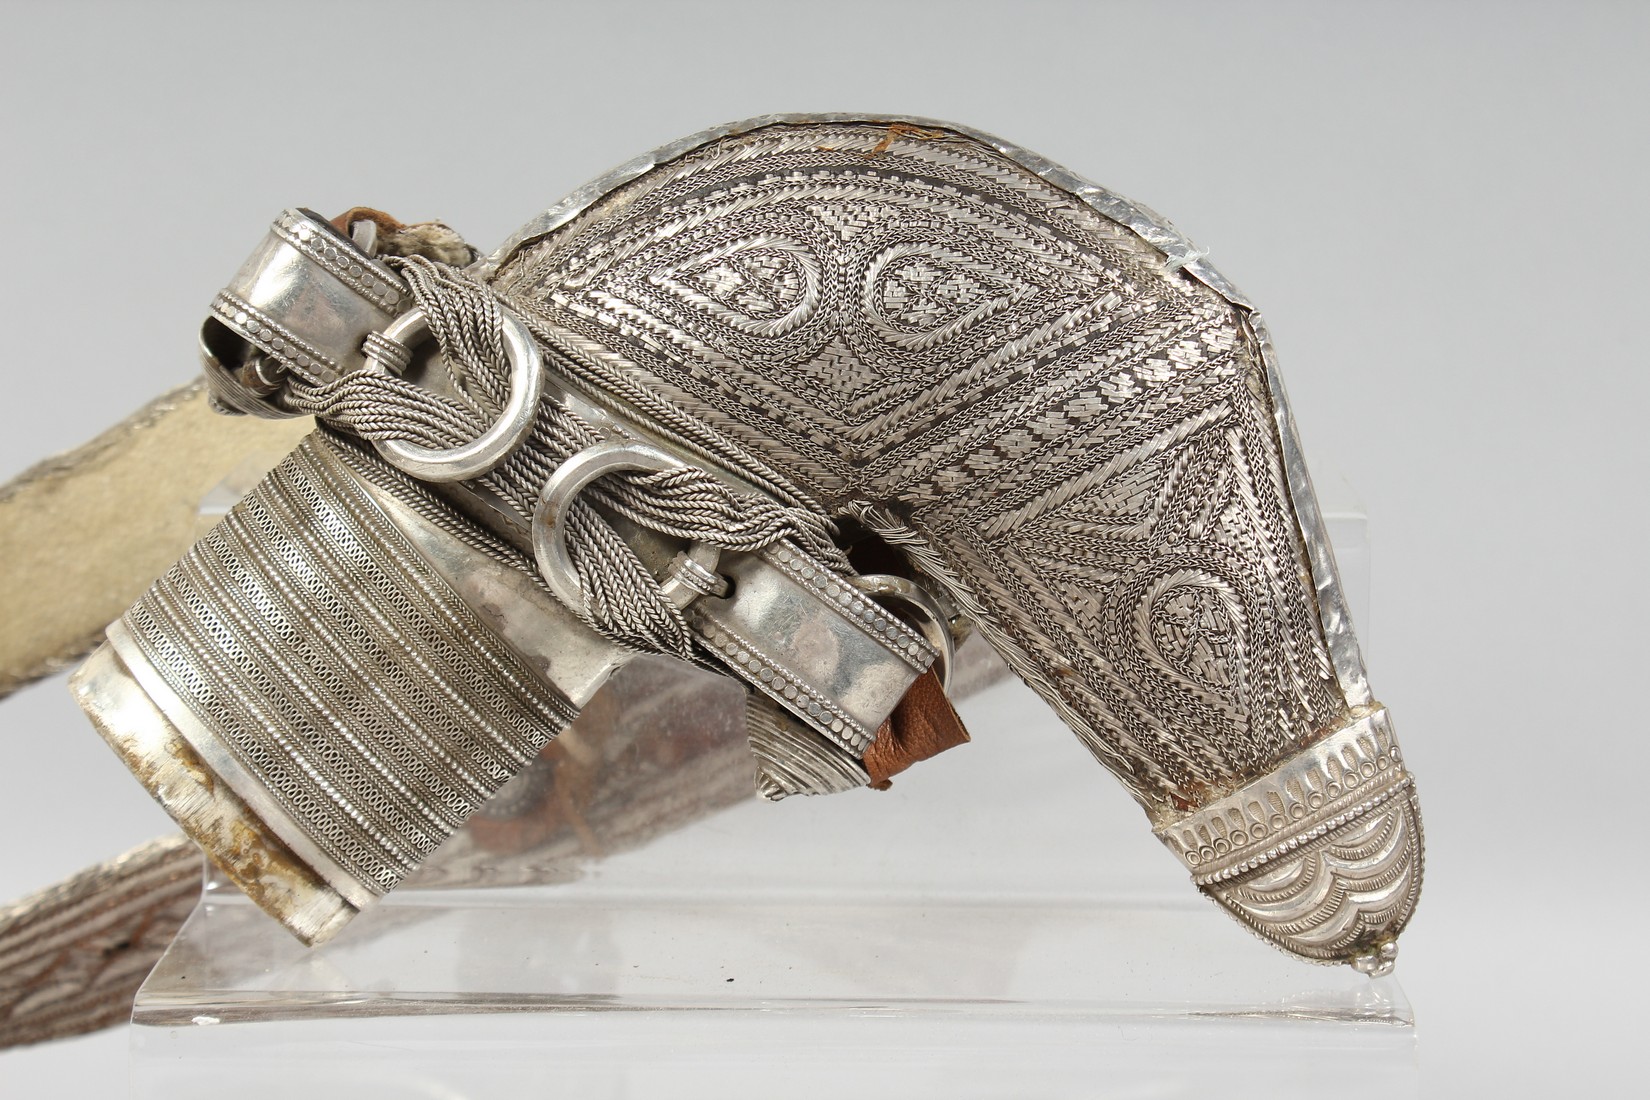 TWO FINE 19TH / EARLY 20TH CENTURY ARAB OMANI JAMBIYA DAGGERS, with bovine horn handles and original - Image 5 of 5